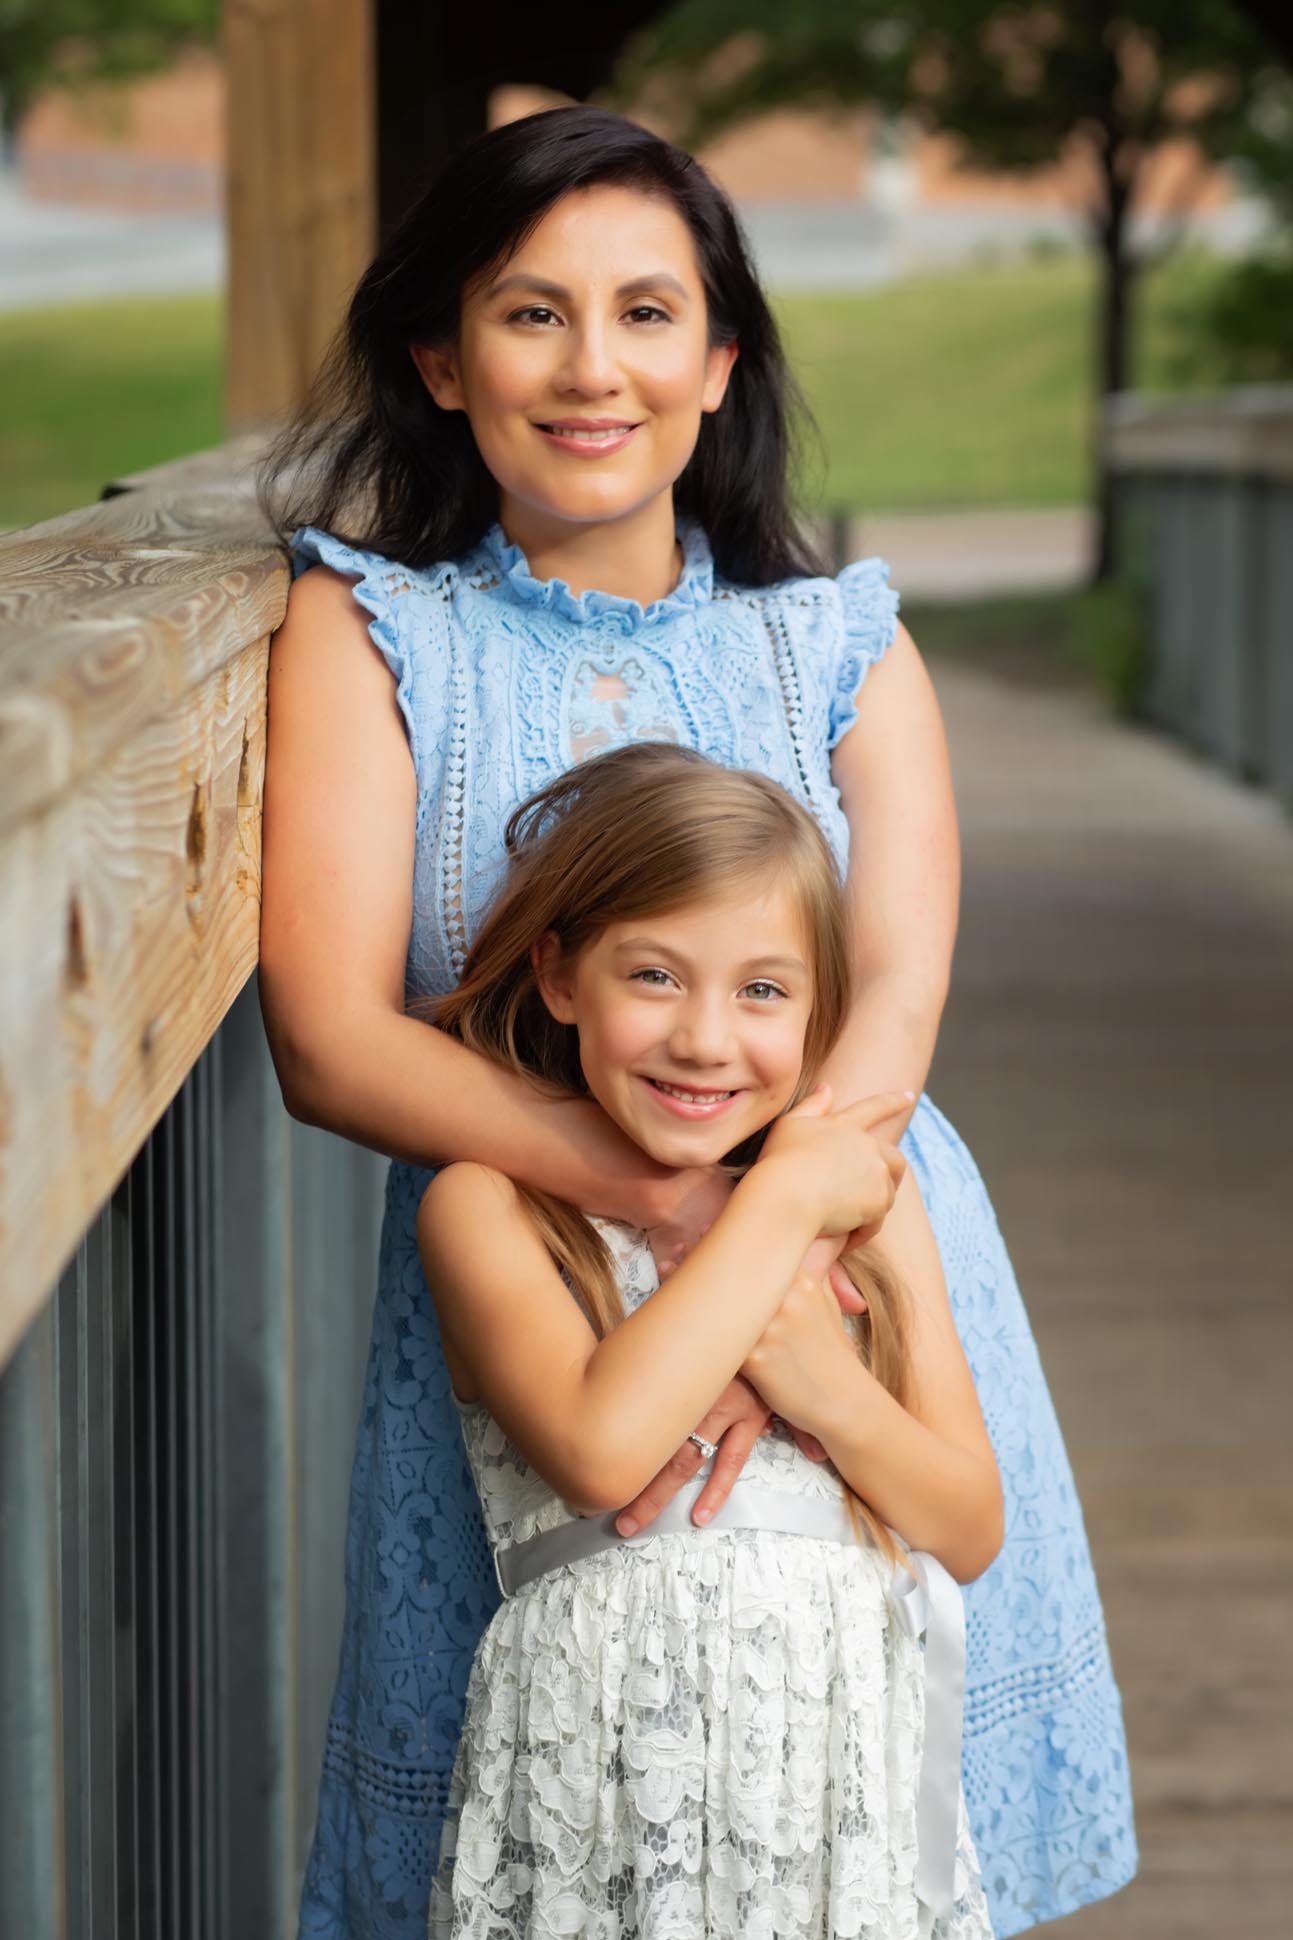 Dallas family photographer shares portrait of mom and daughter on bridge in Prairie Creek Park in Richardson Texas